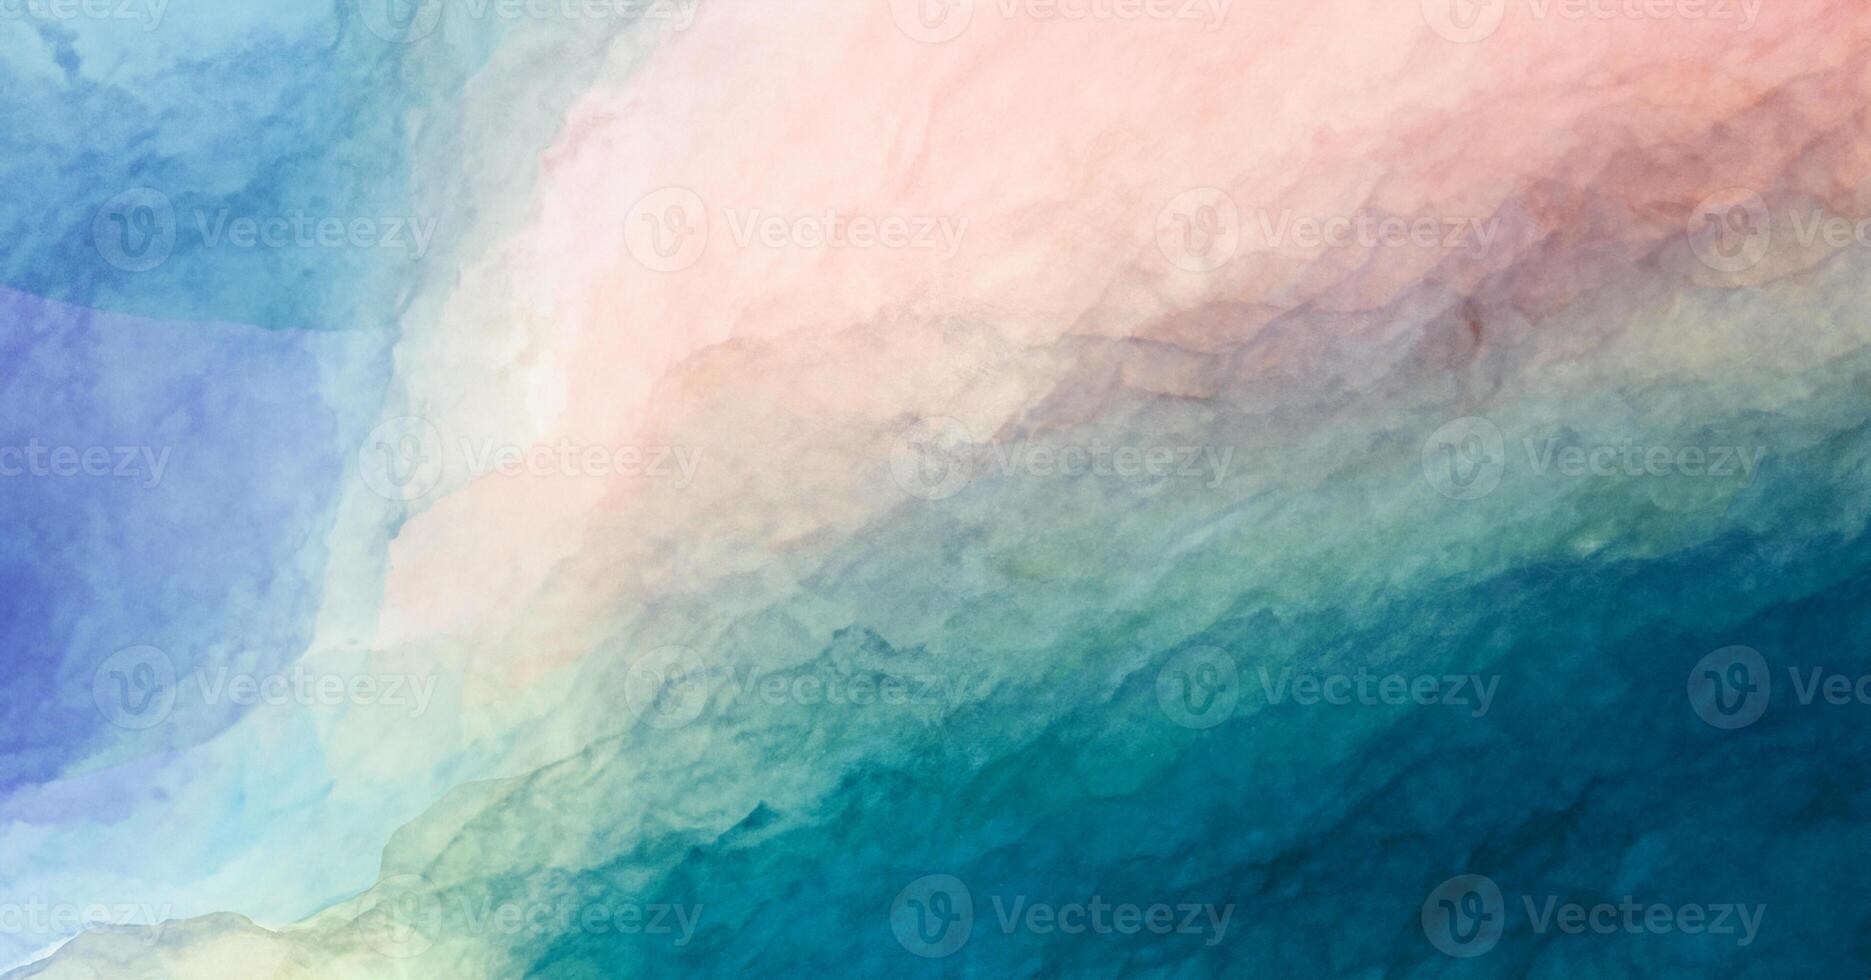 Abstract colorful watercolor paint blue green pink red background with liquid fluid texture for background, banner photo